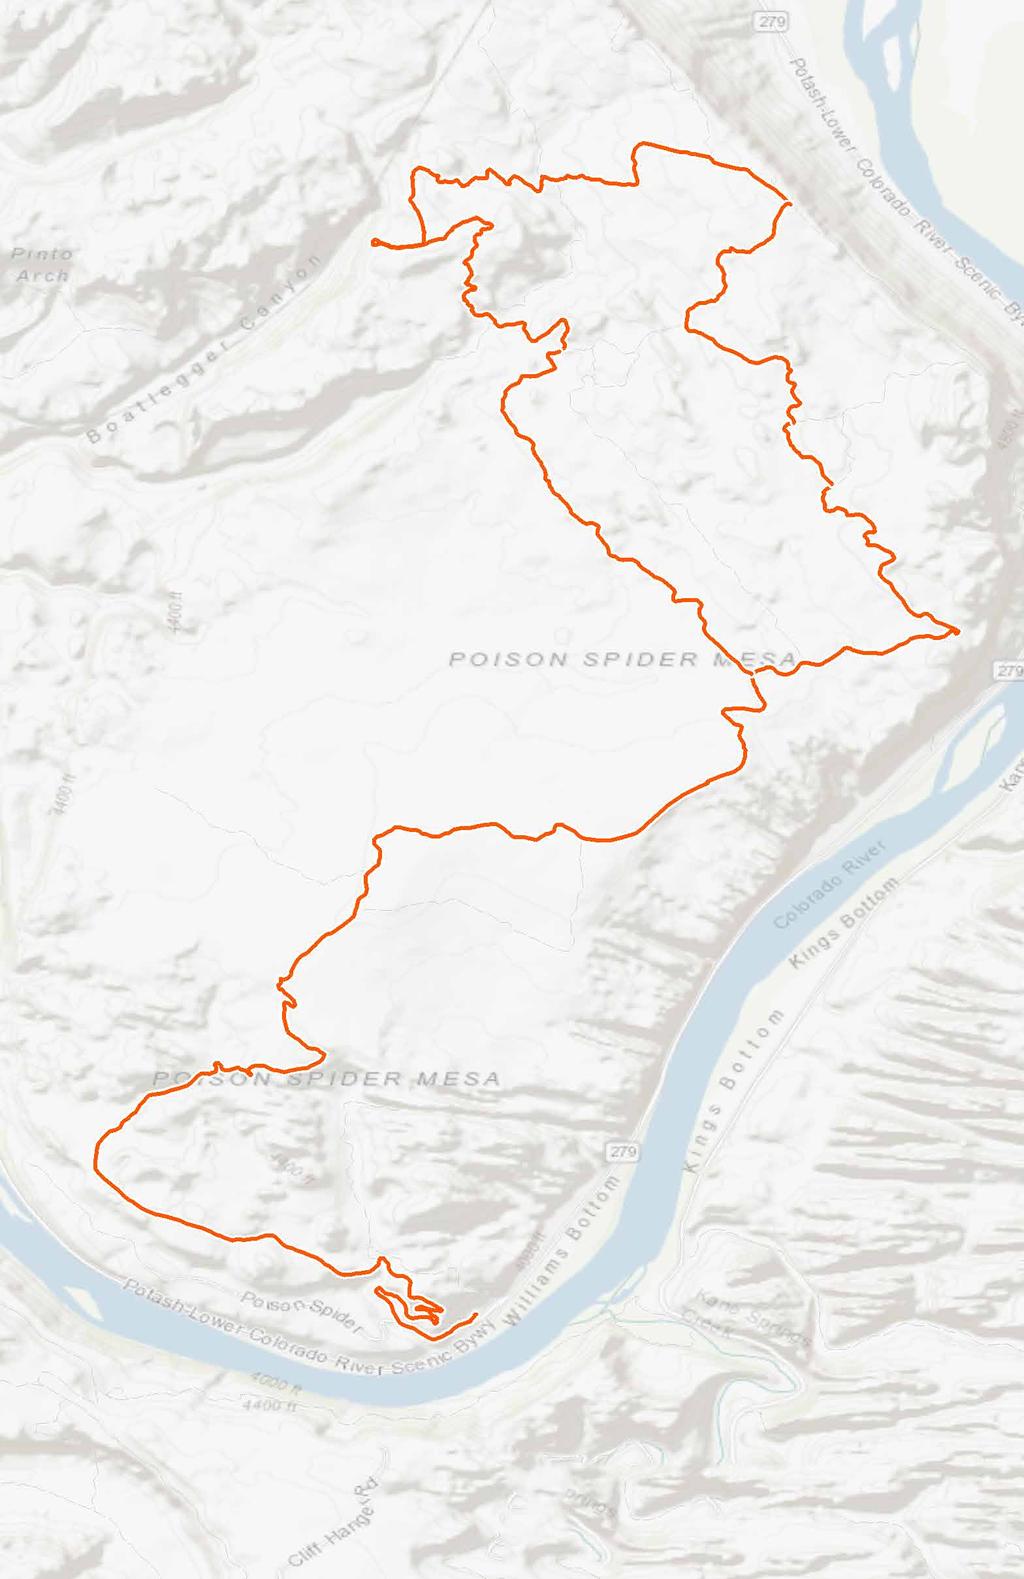 3POISON SPIDER MESA 17.7 MILES 2.93 BACKGROUND» 17.7 miles» 1,975 elevation gain» Lollipop + loop» Challenging 4x4 doubletrack» Slickrock ledges and sections of sand» https://www.mtbproject.